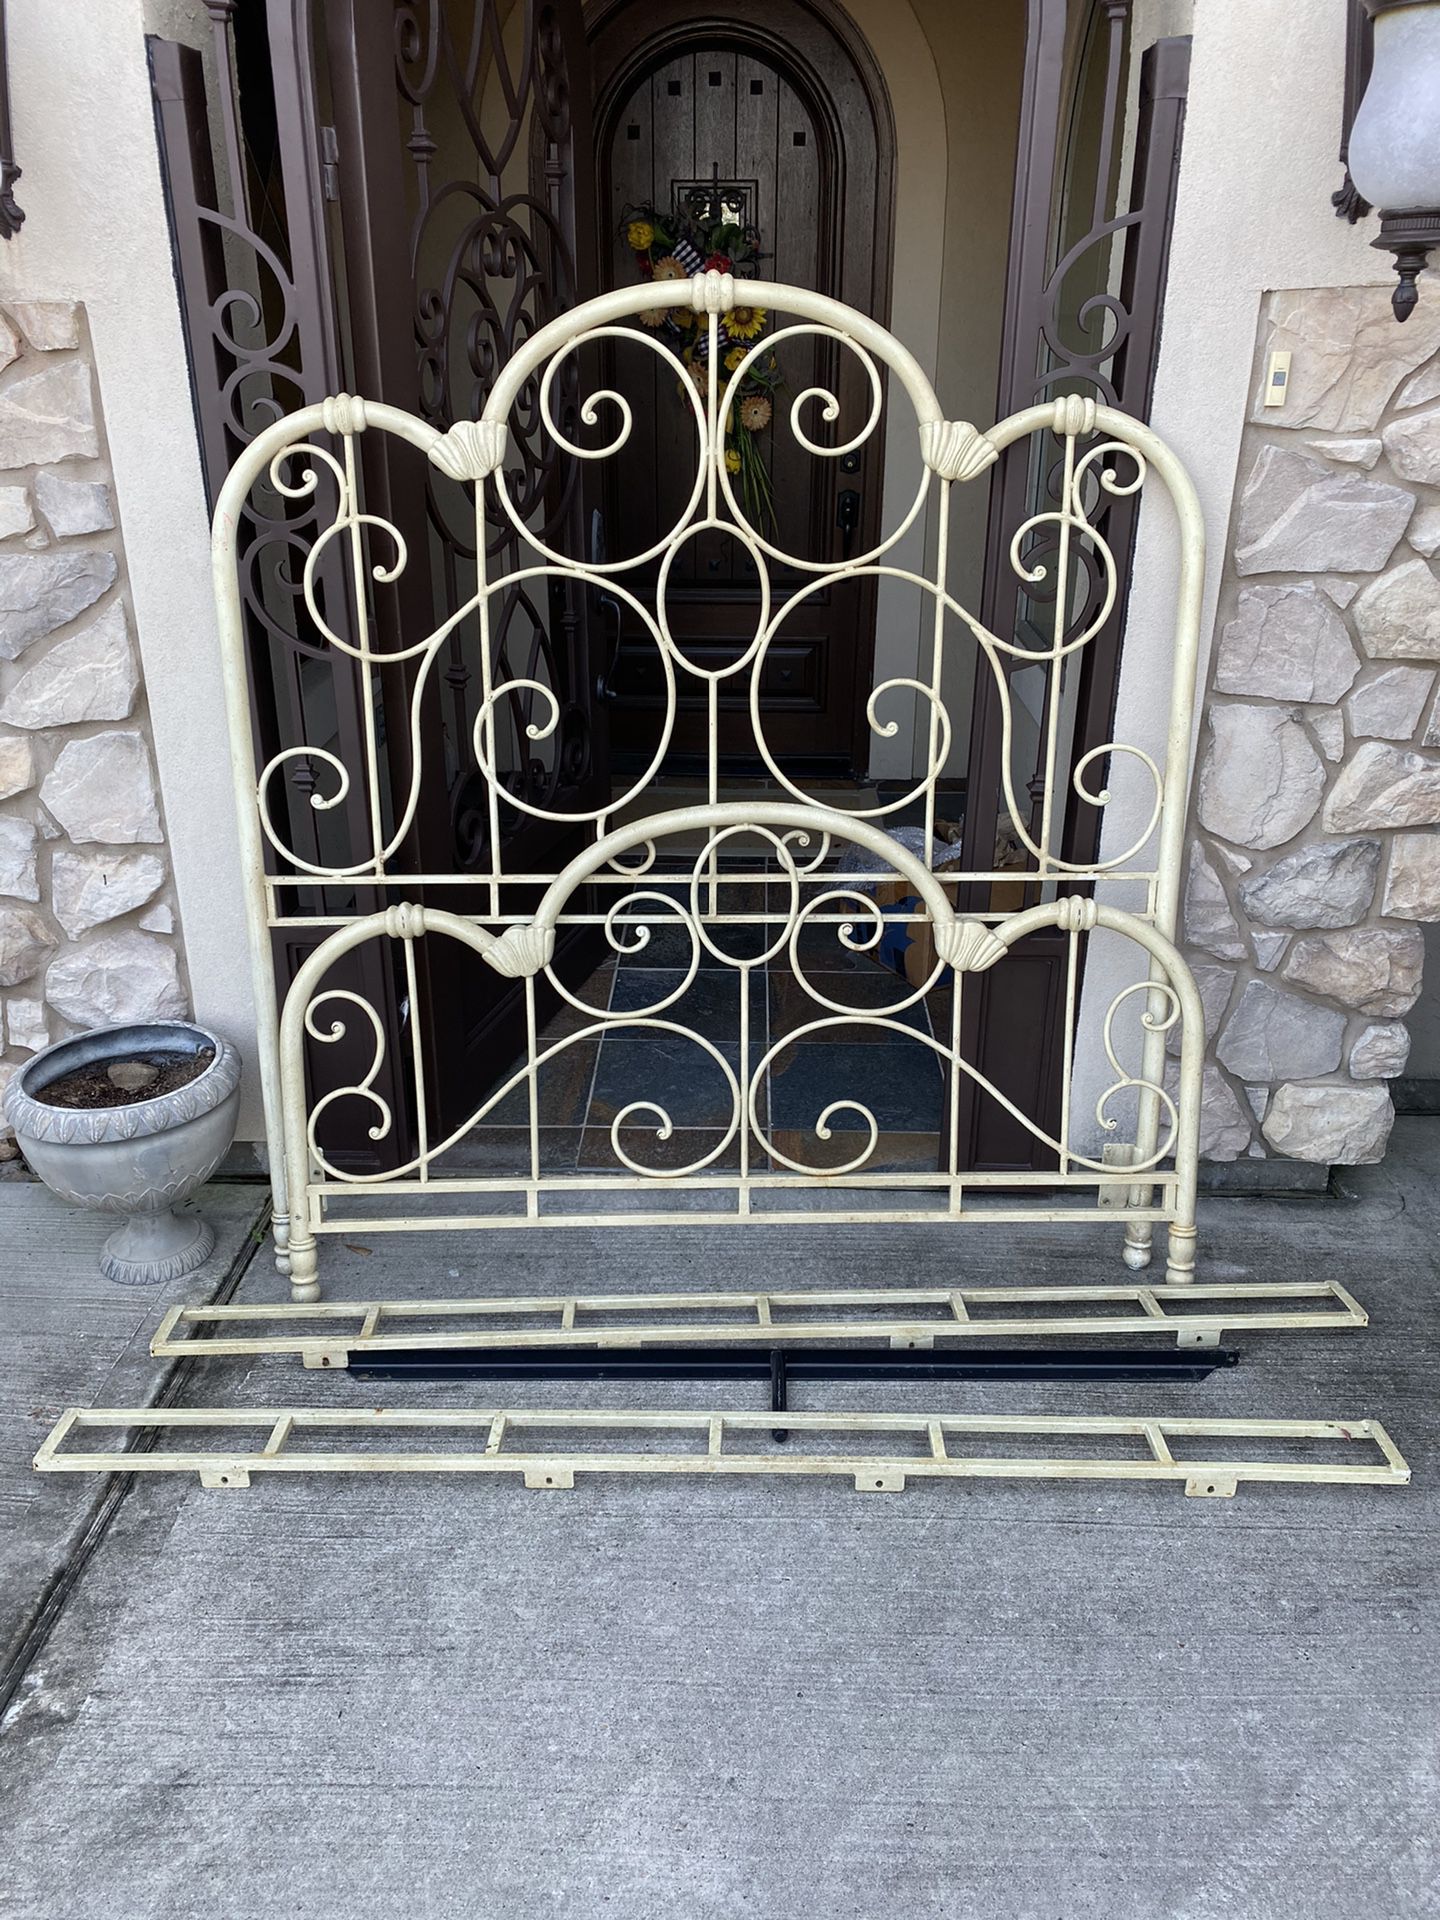 Queen size iron decorative bed frame - cream colored